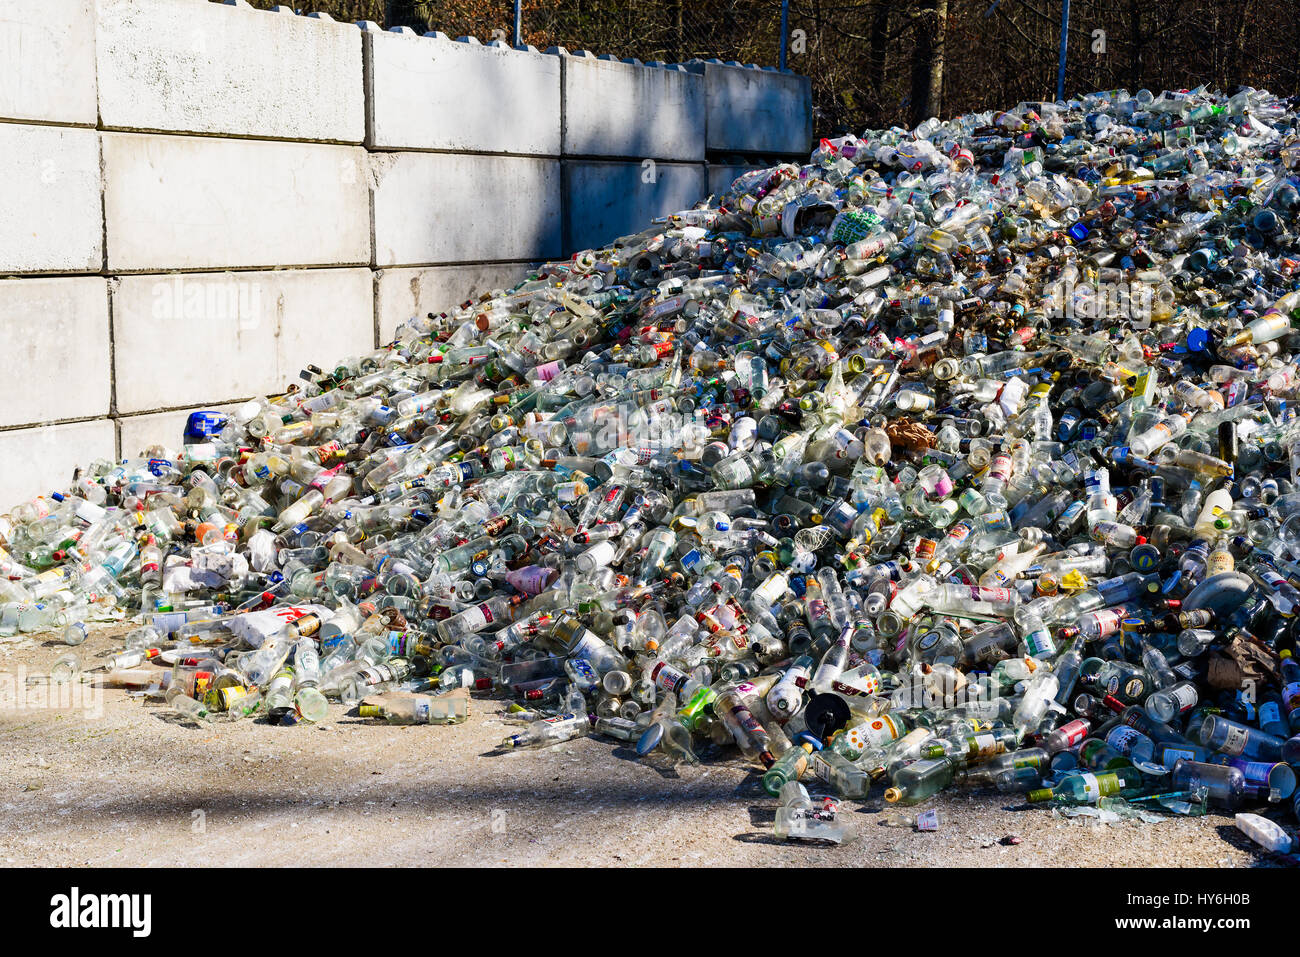 Ronneby, Sweden - March 27, 2017: Documentary of public waste station. Large pile of clear glass destined for recycling. Stock Photo